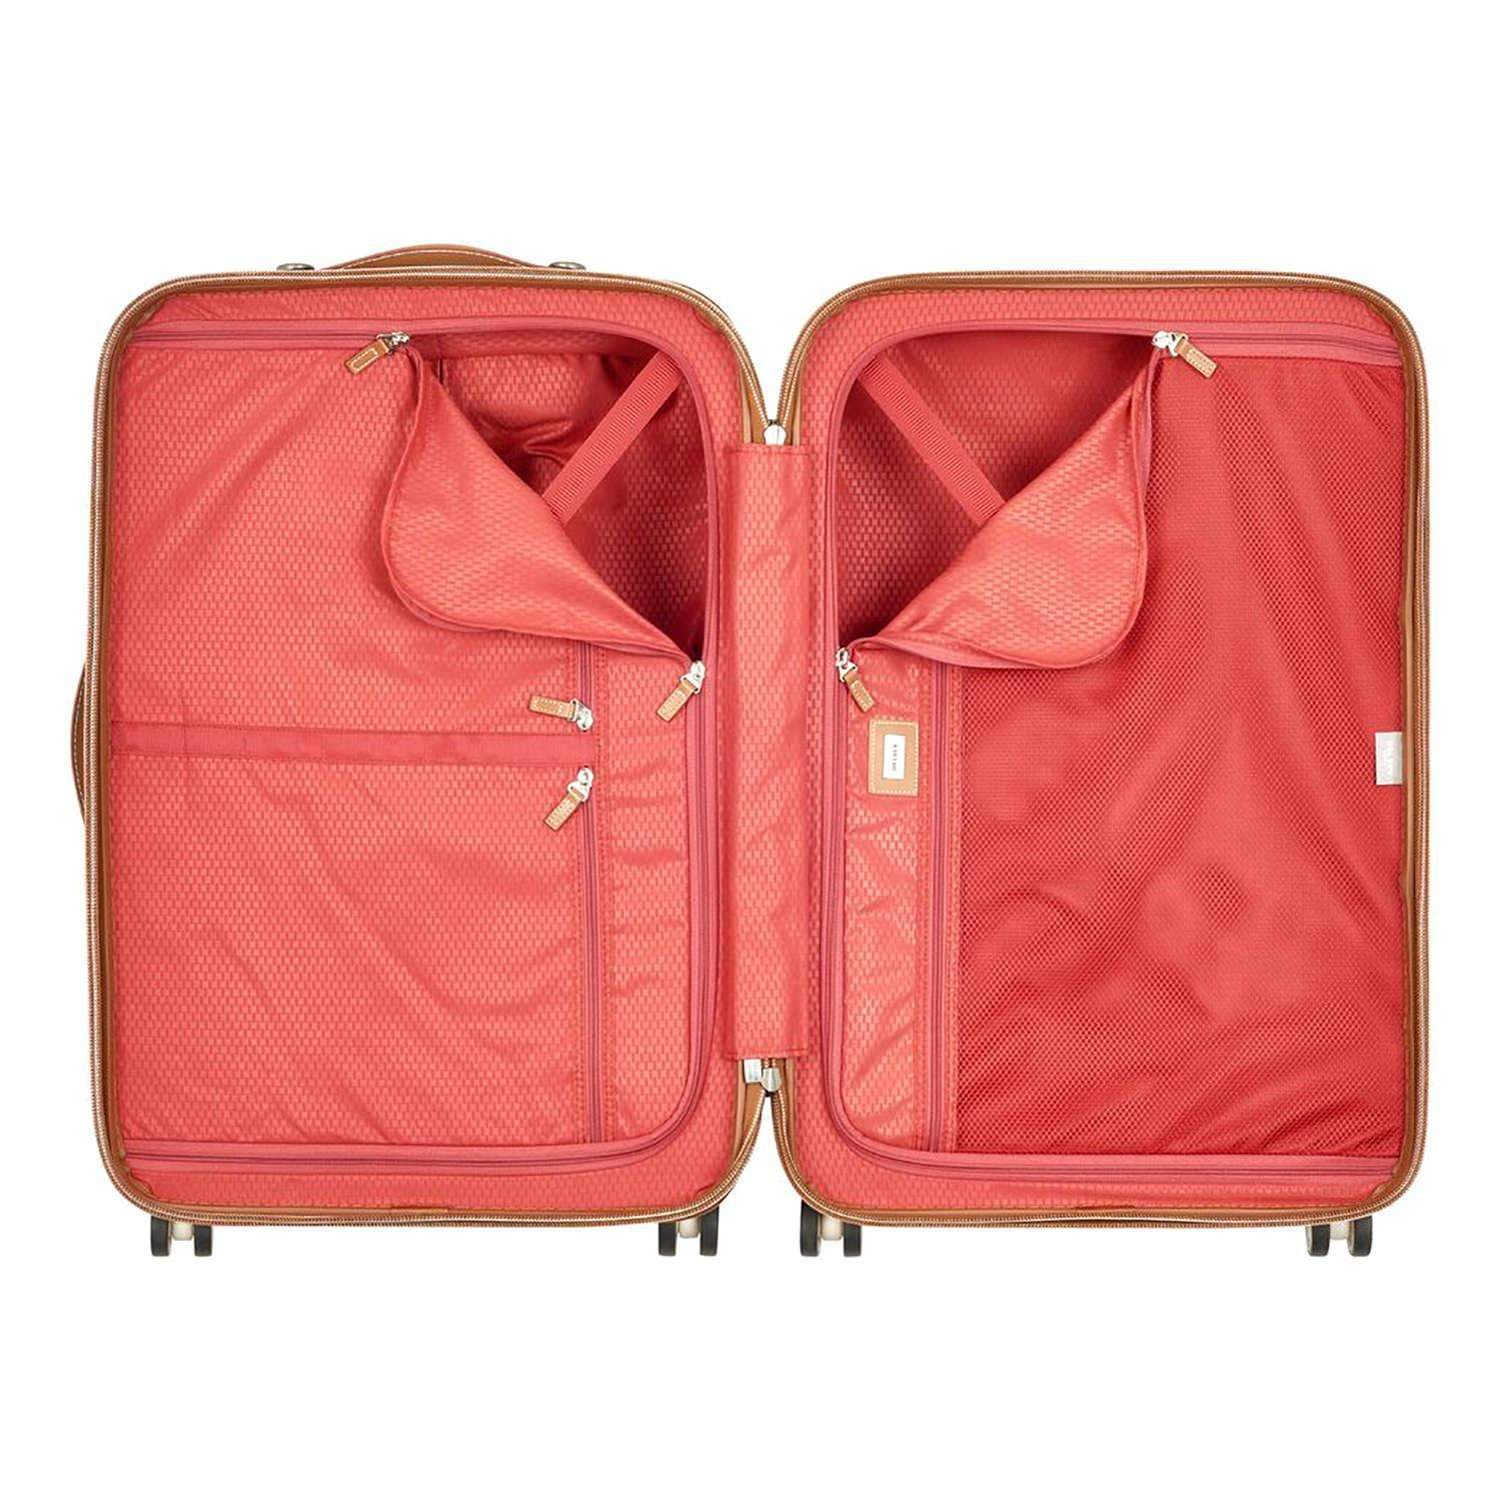 Delsey Chatelet Air 4 Double Wheel Cabin Trolley Case - Angora - 00167281015 ANGORA - Jashanmal Home